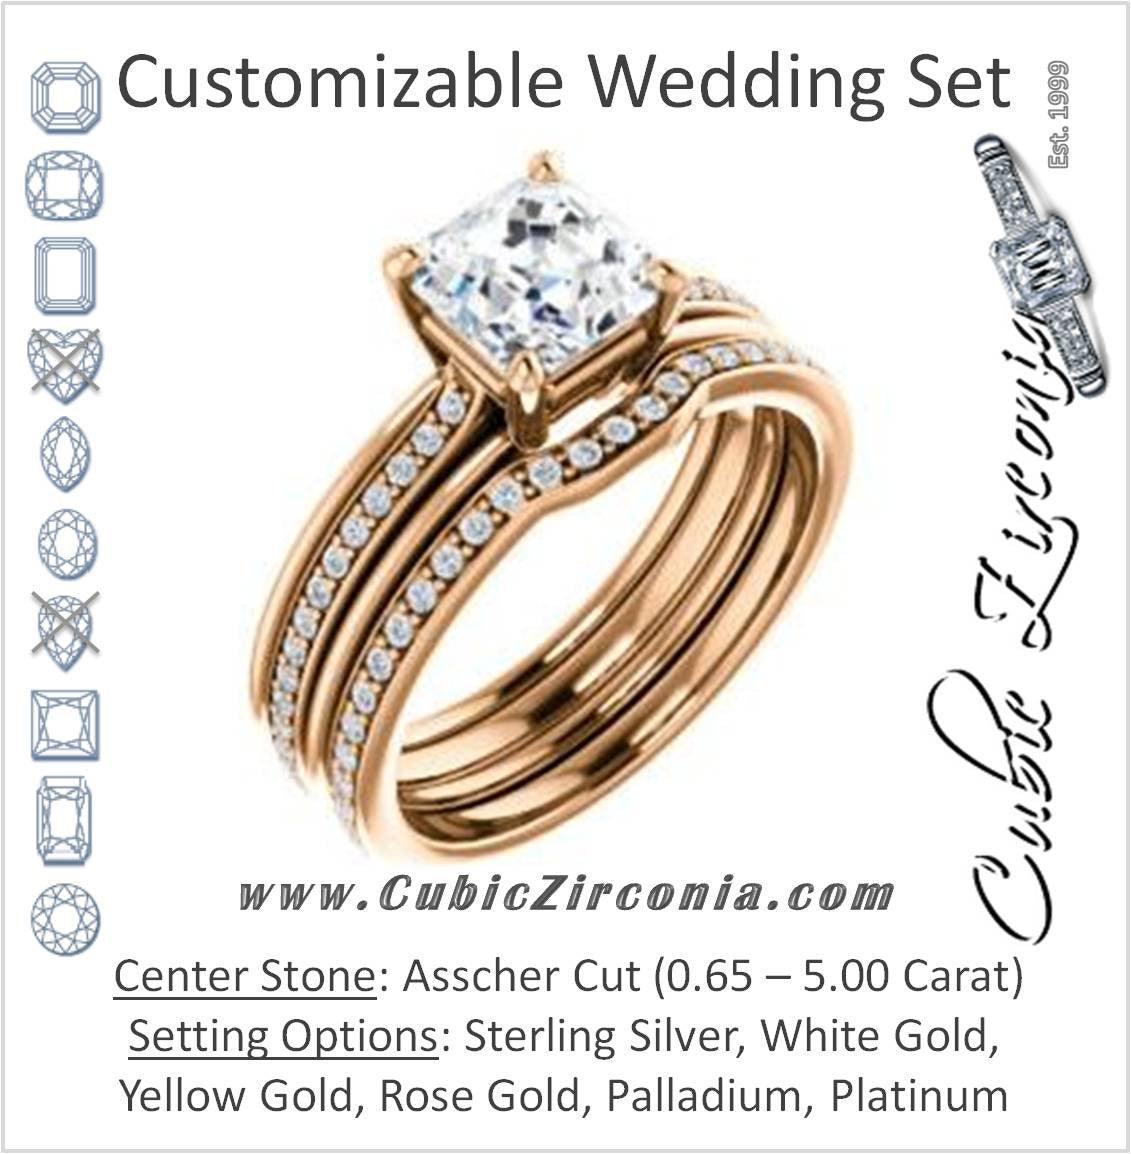 CZ Wedding Set, featuring The Rikki engagement ring (Customizable Asscher Cut Design with Double-Grooved Pavé Band)